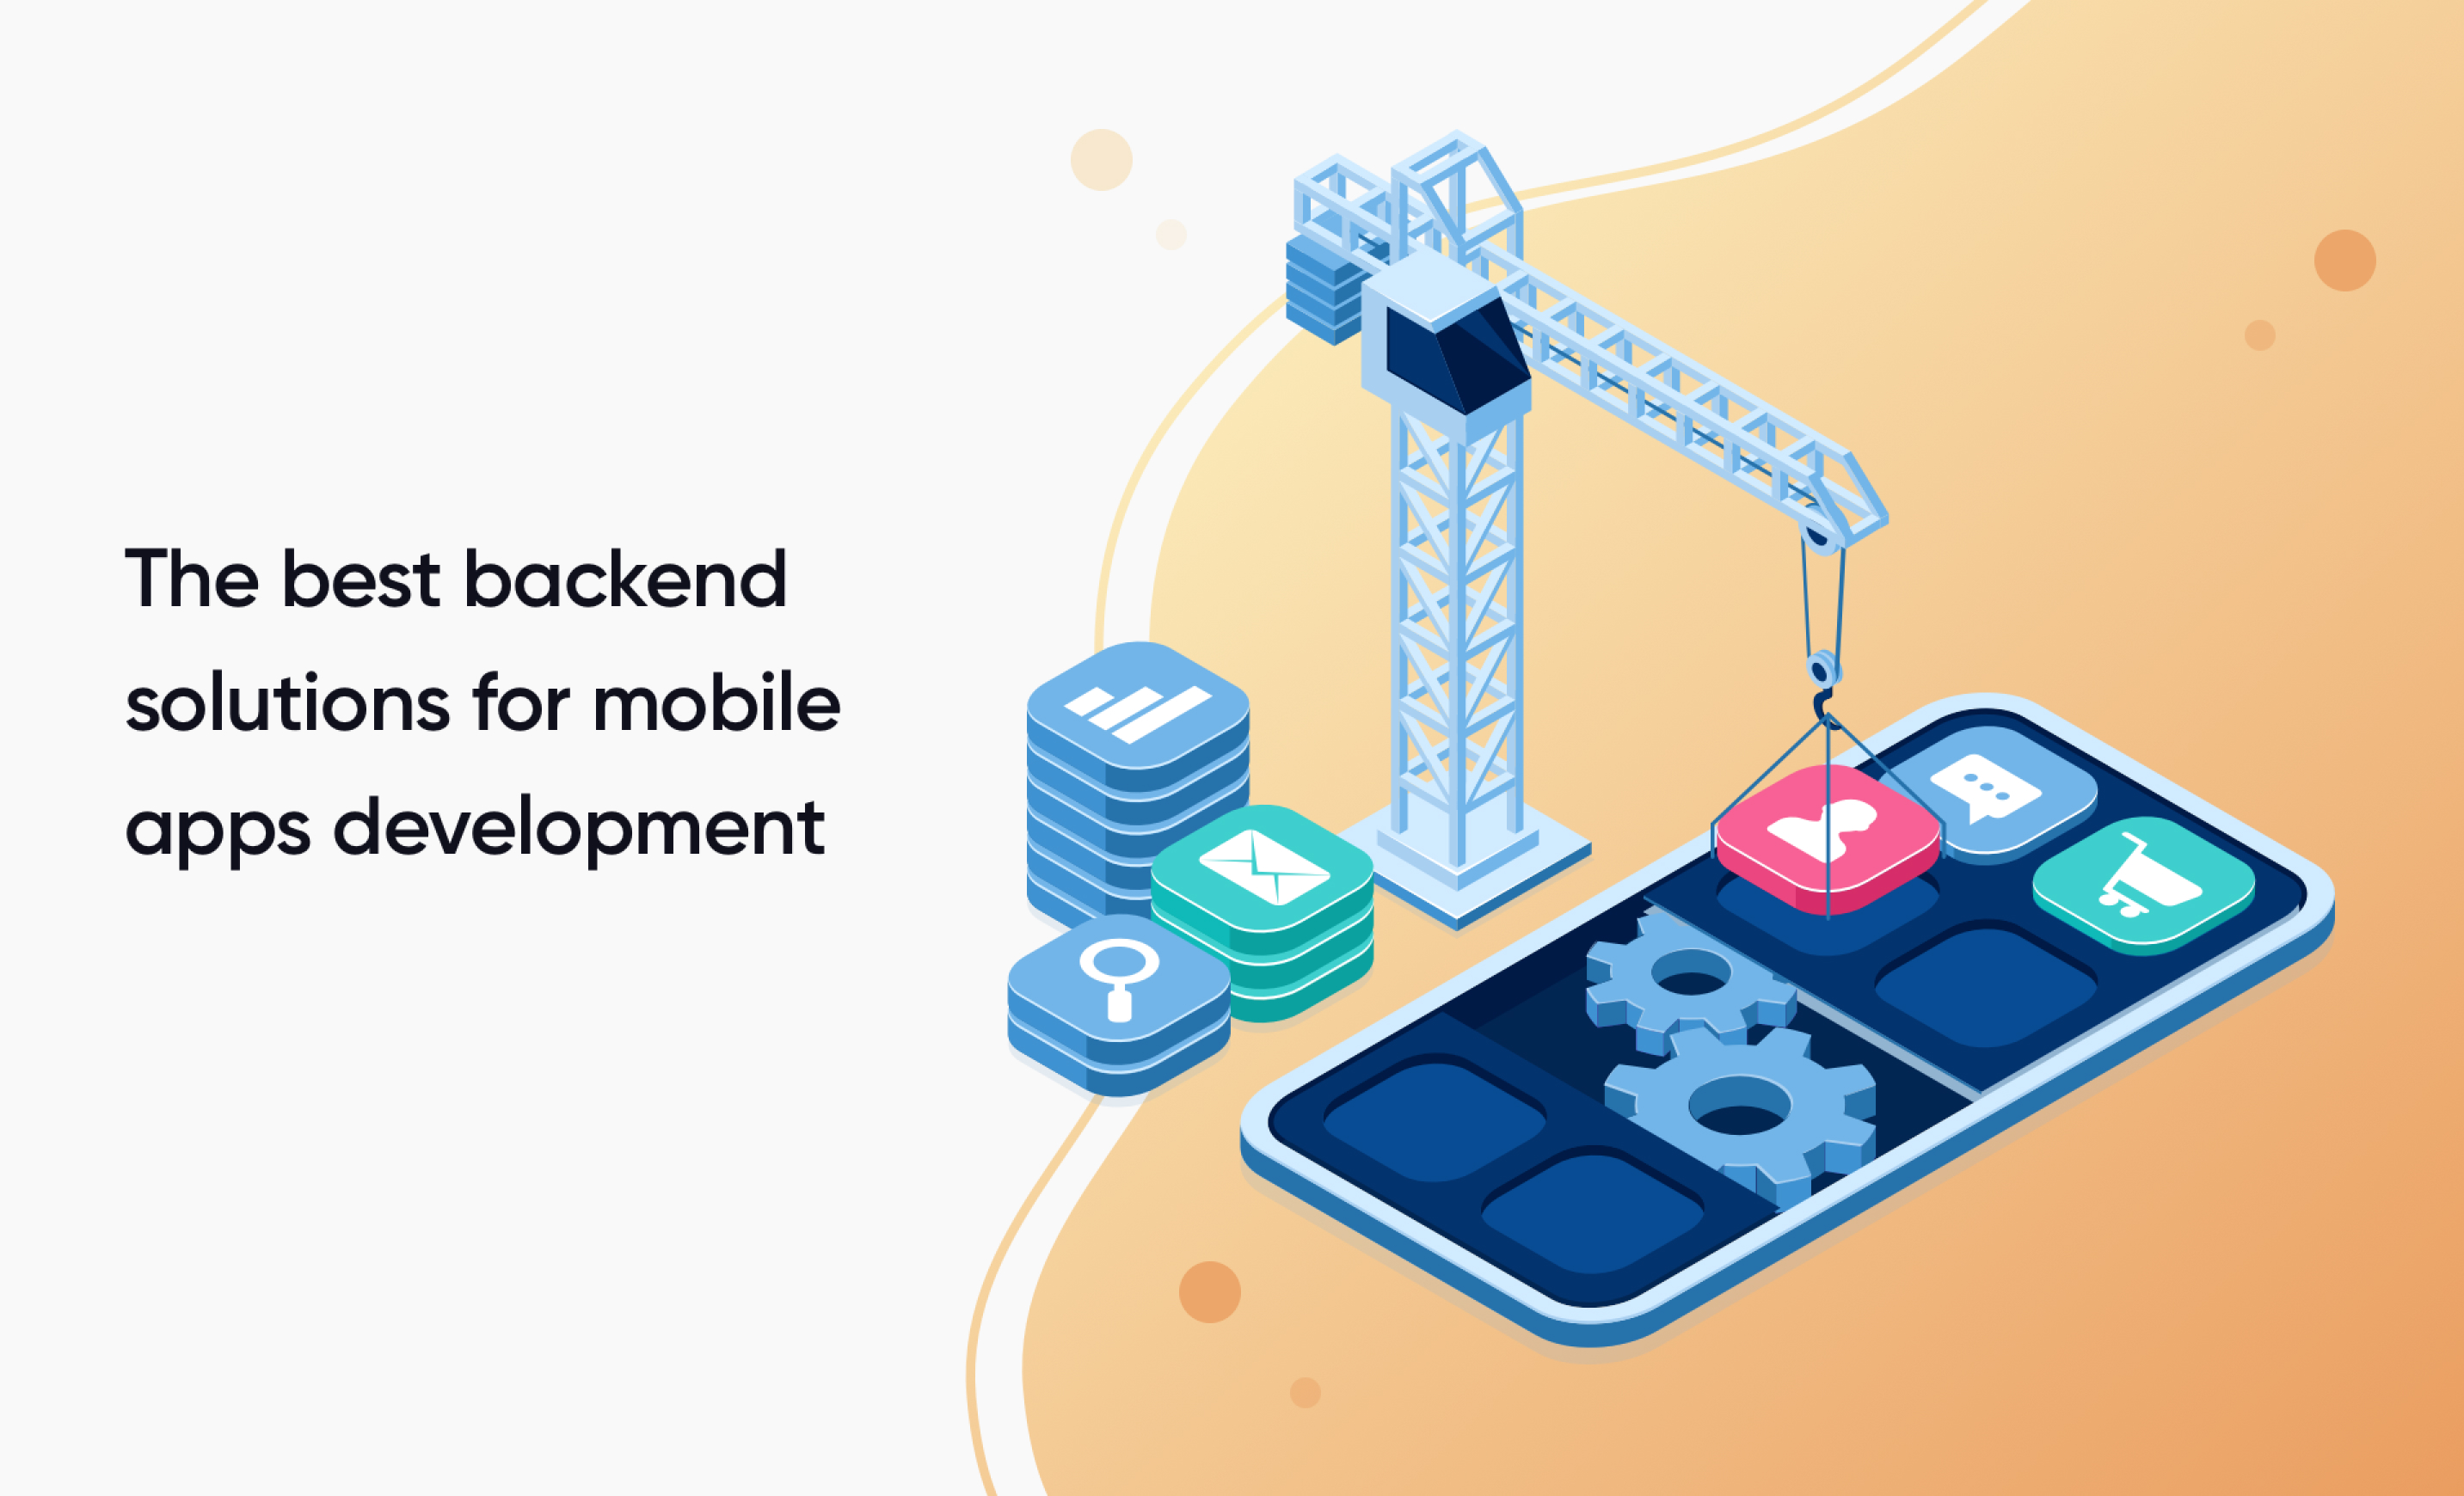 The best backend solutions for mobile apps development